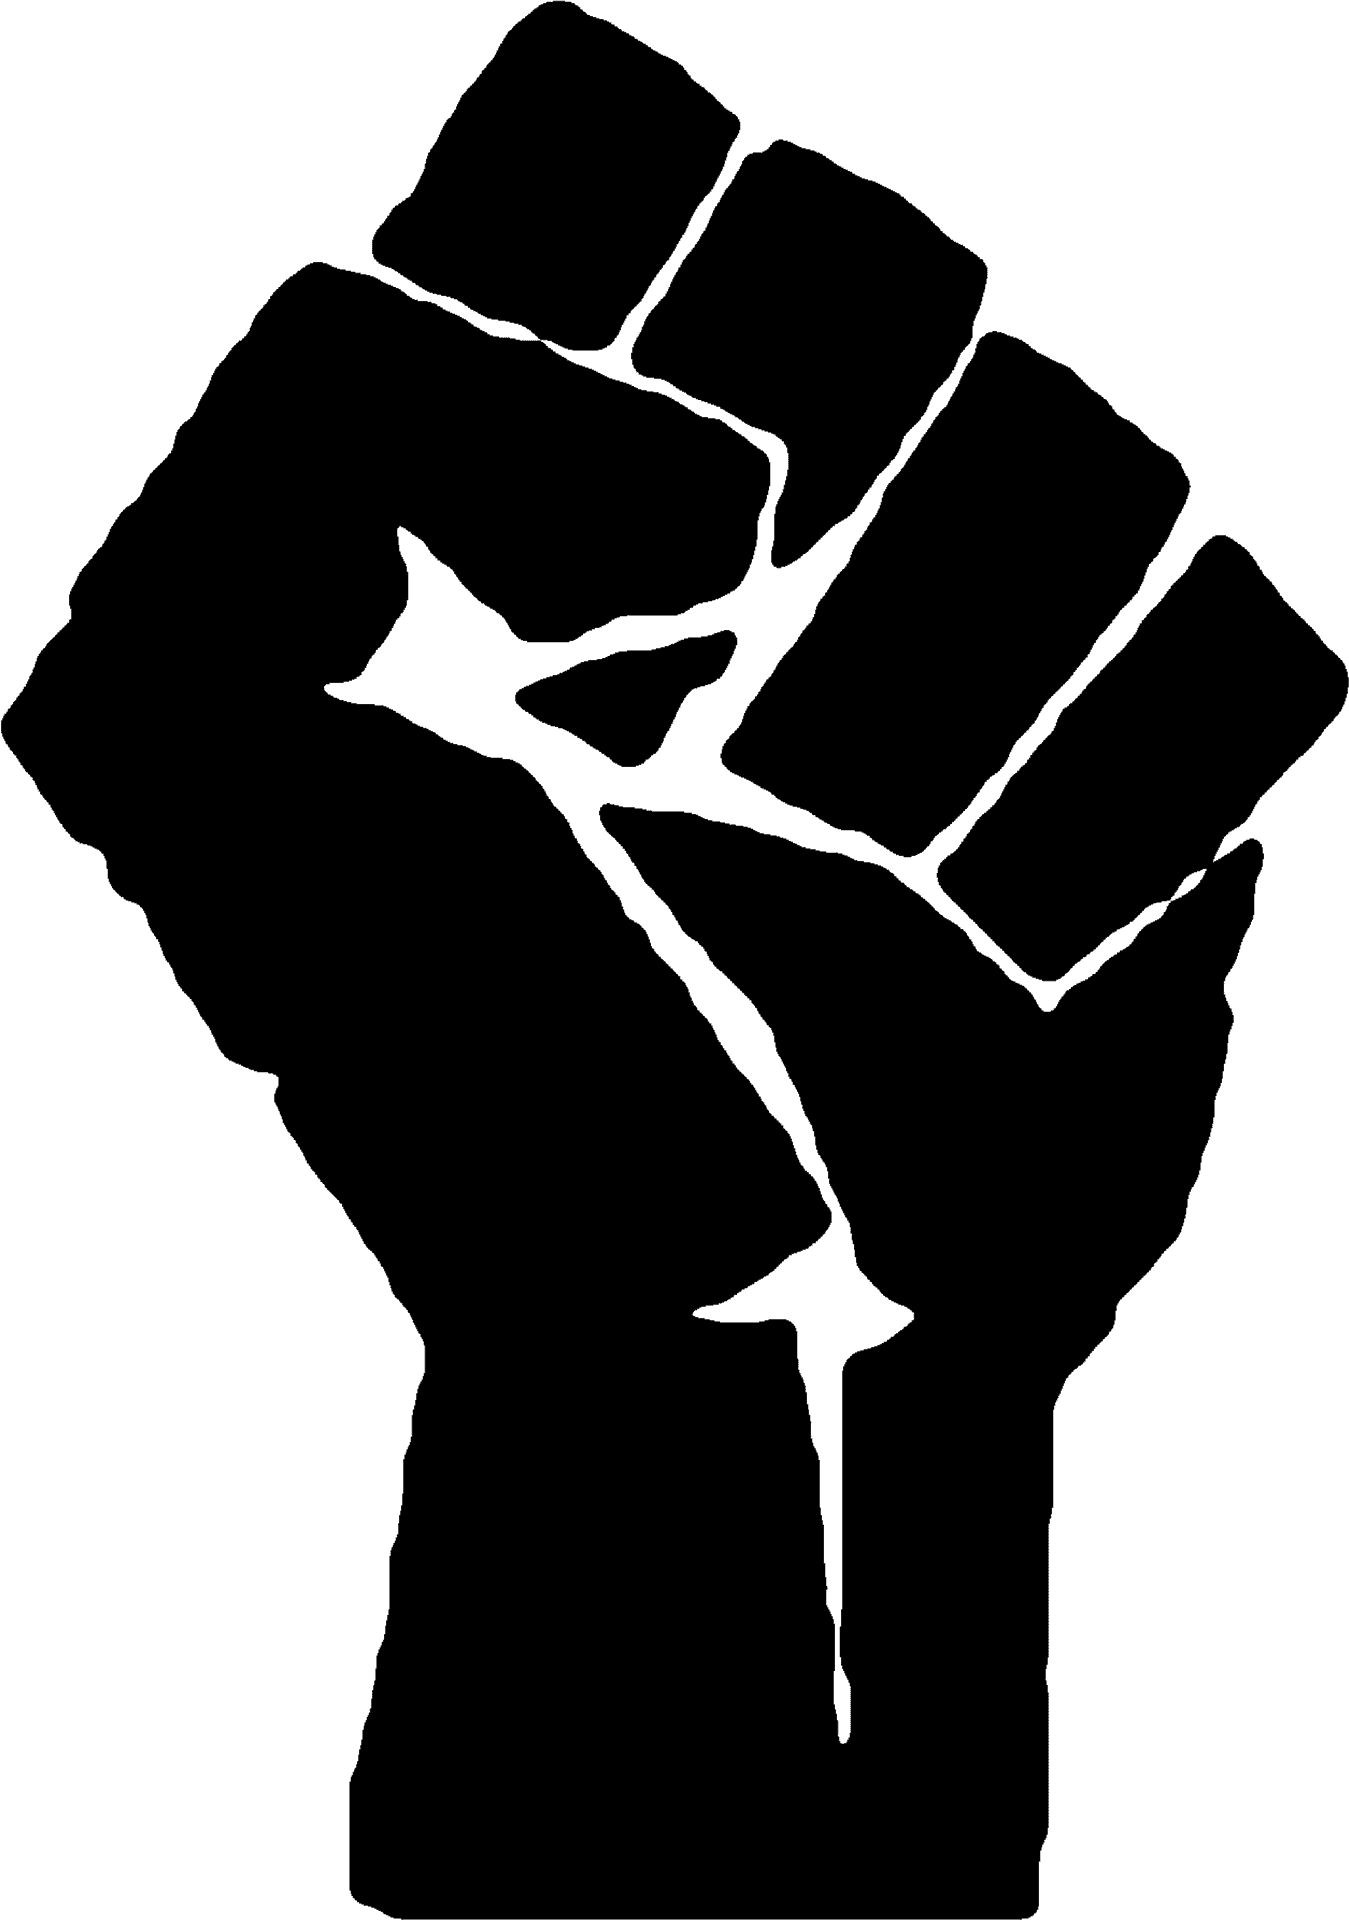 Raised Fist Silhouette Justice Symbol PNG